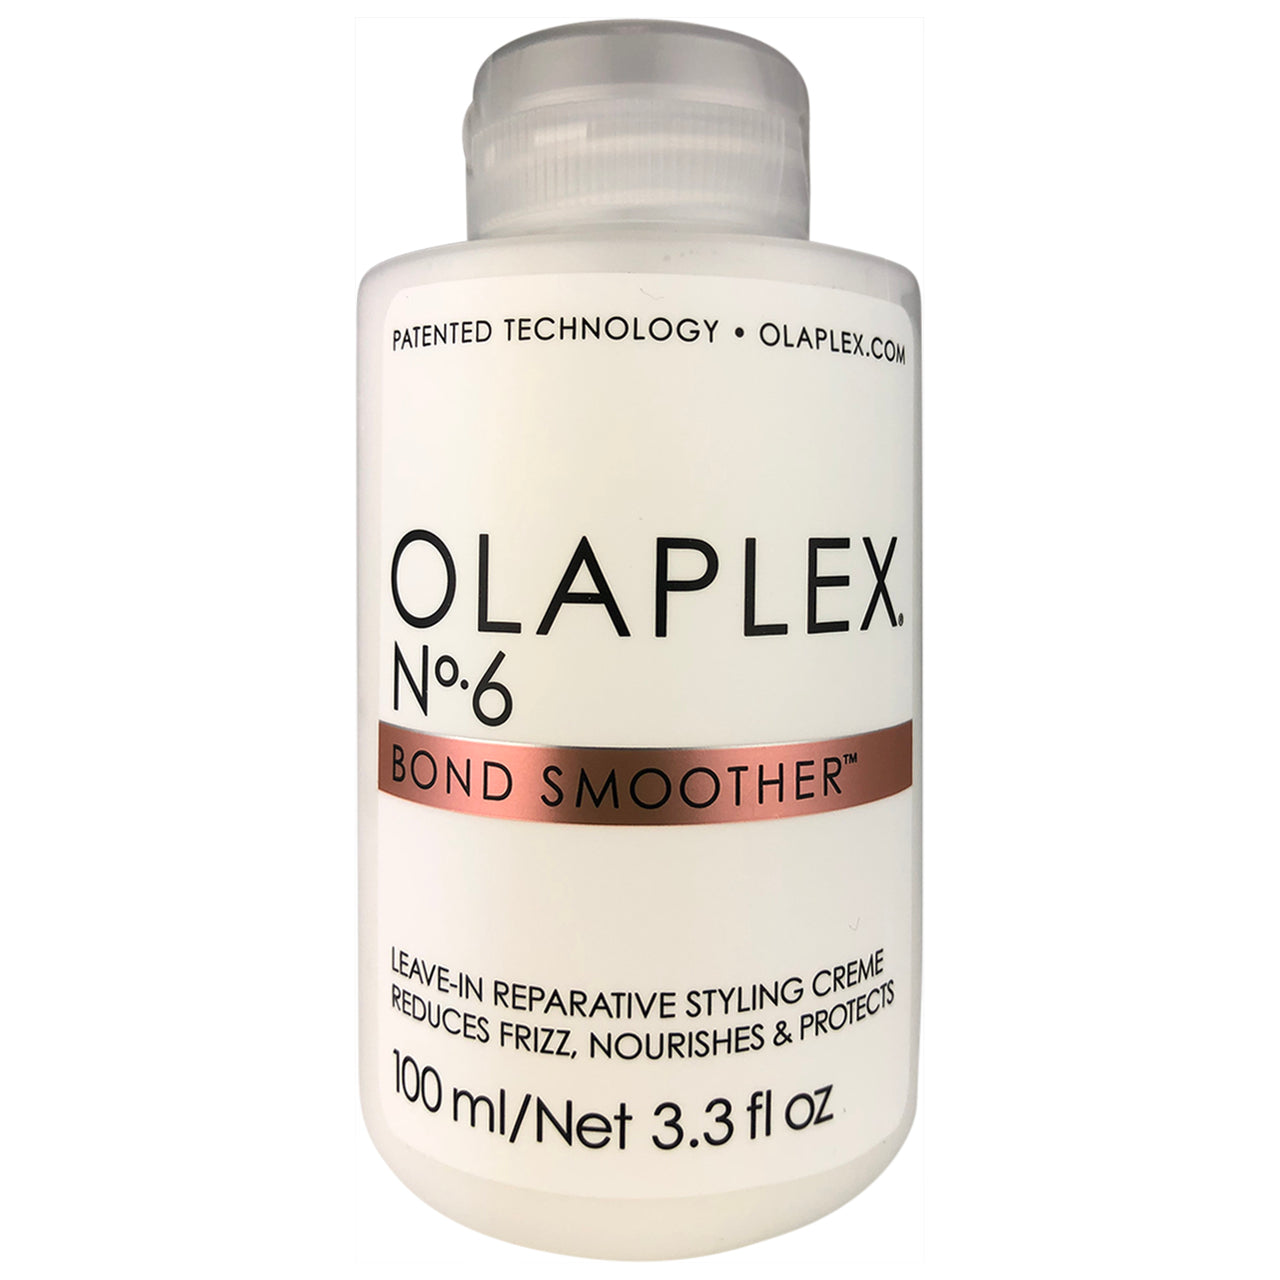 Olaplex No. 6 Bond Hair  Smoother Leave In Reparative Styling Cr�me, Reduces  Frizz, Nourishes & Protects 3.3 oz